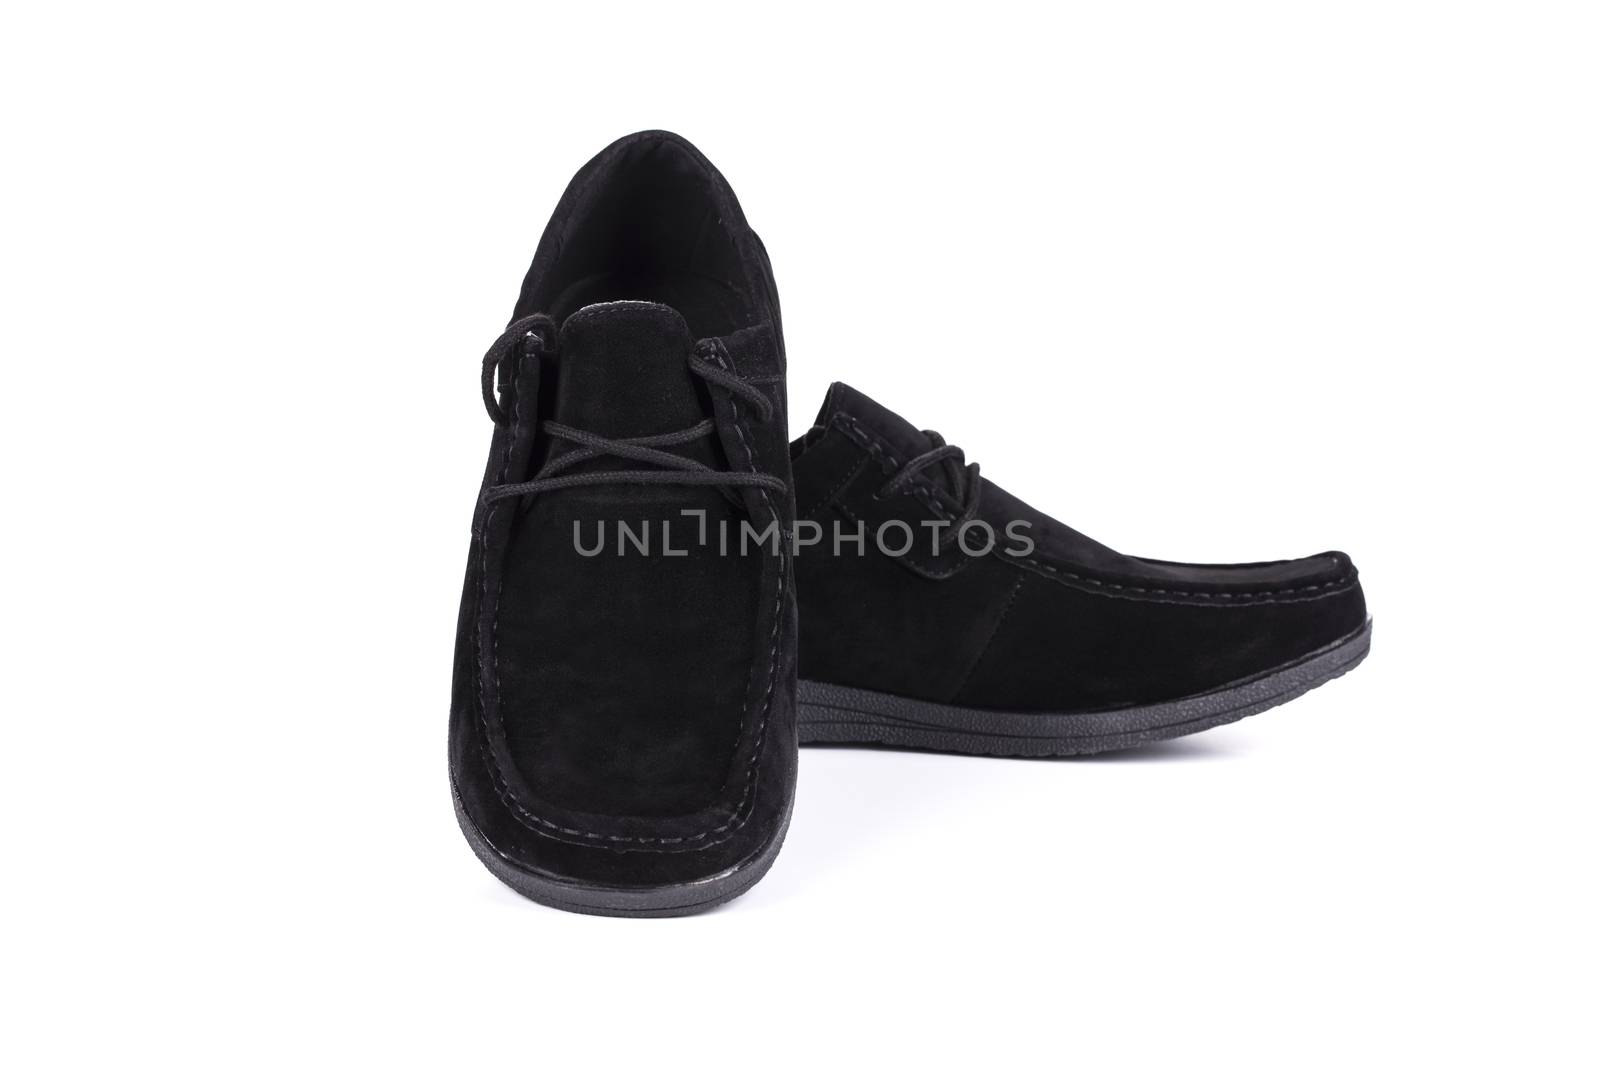 Male shoes on white background by ozaiachin